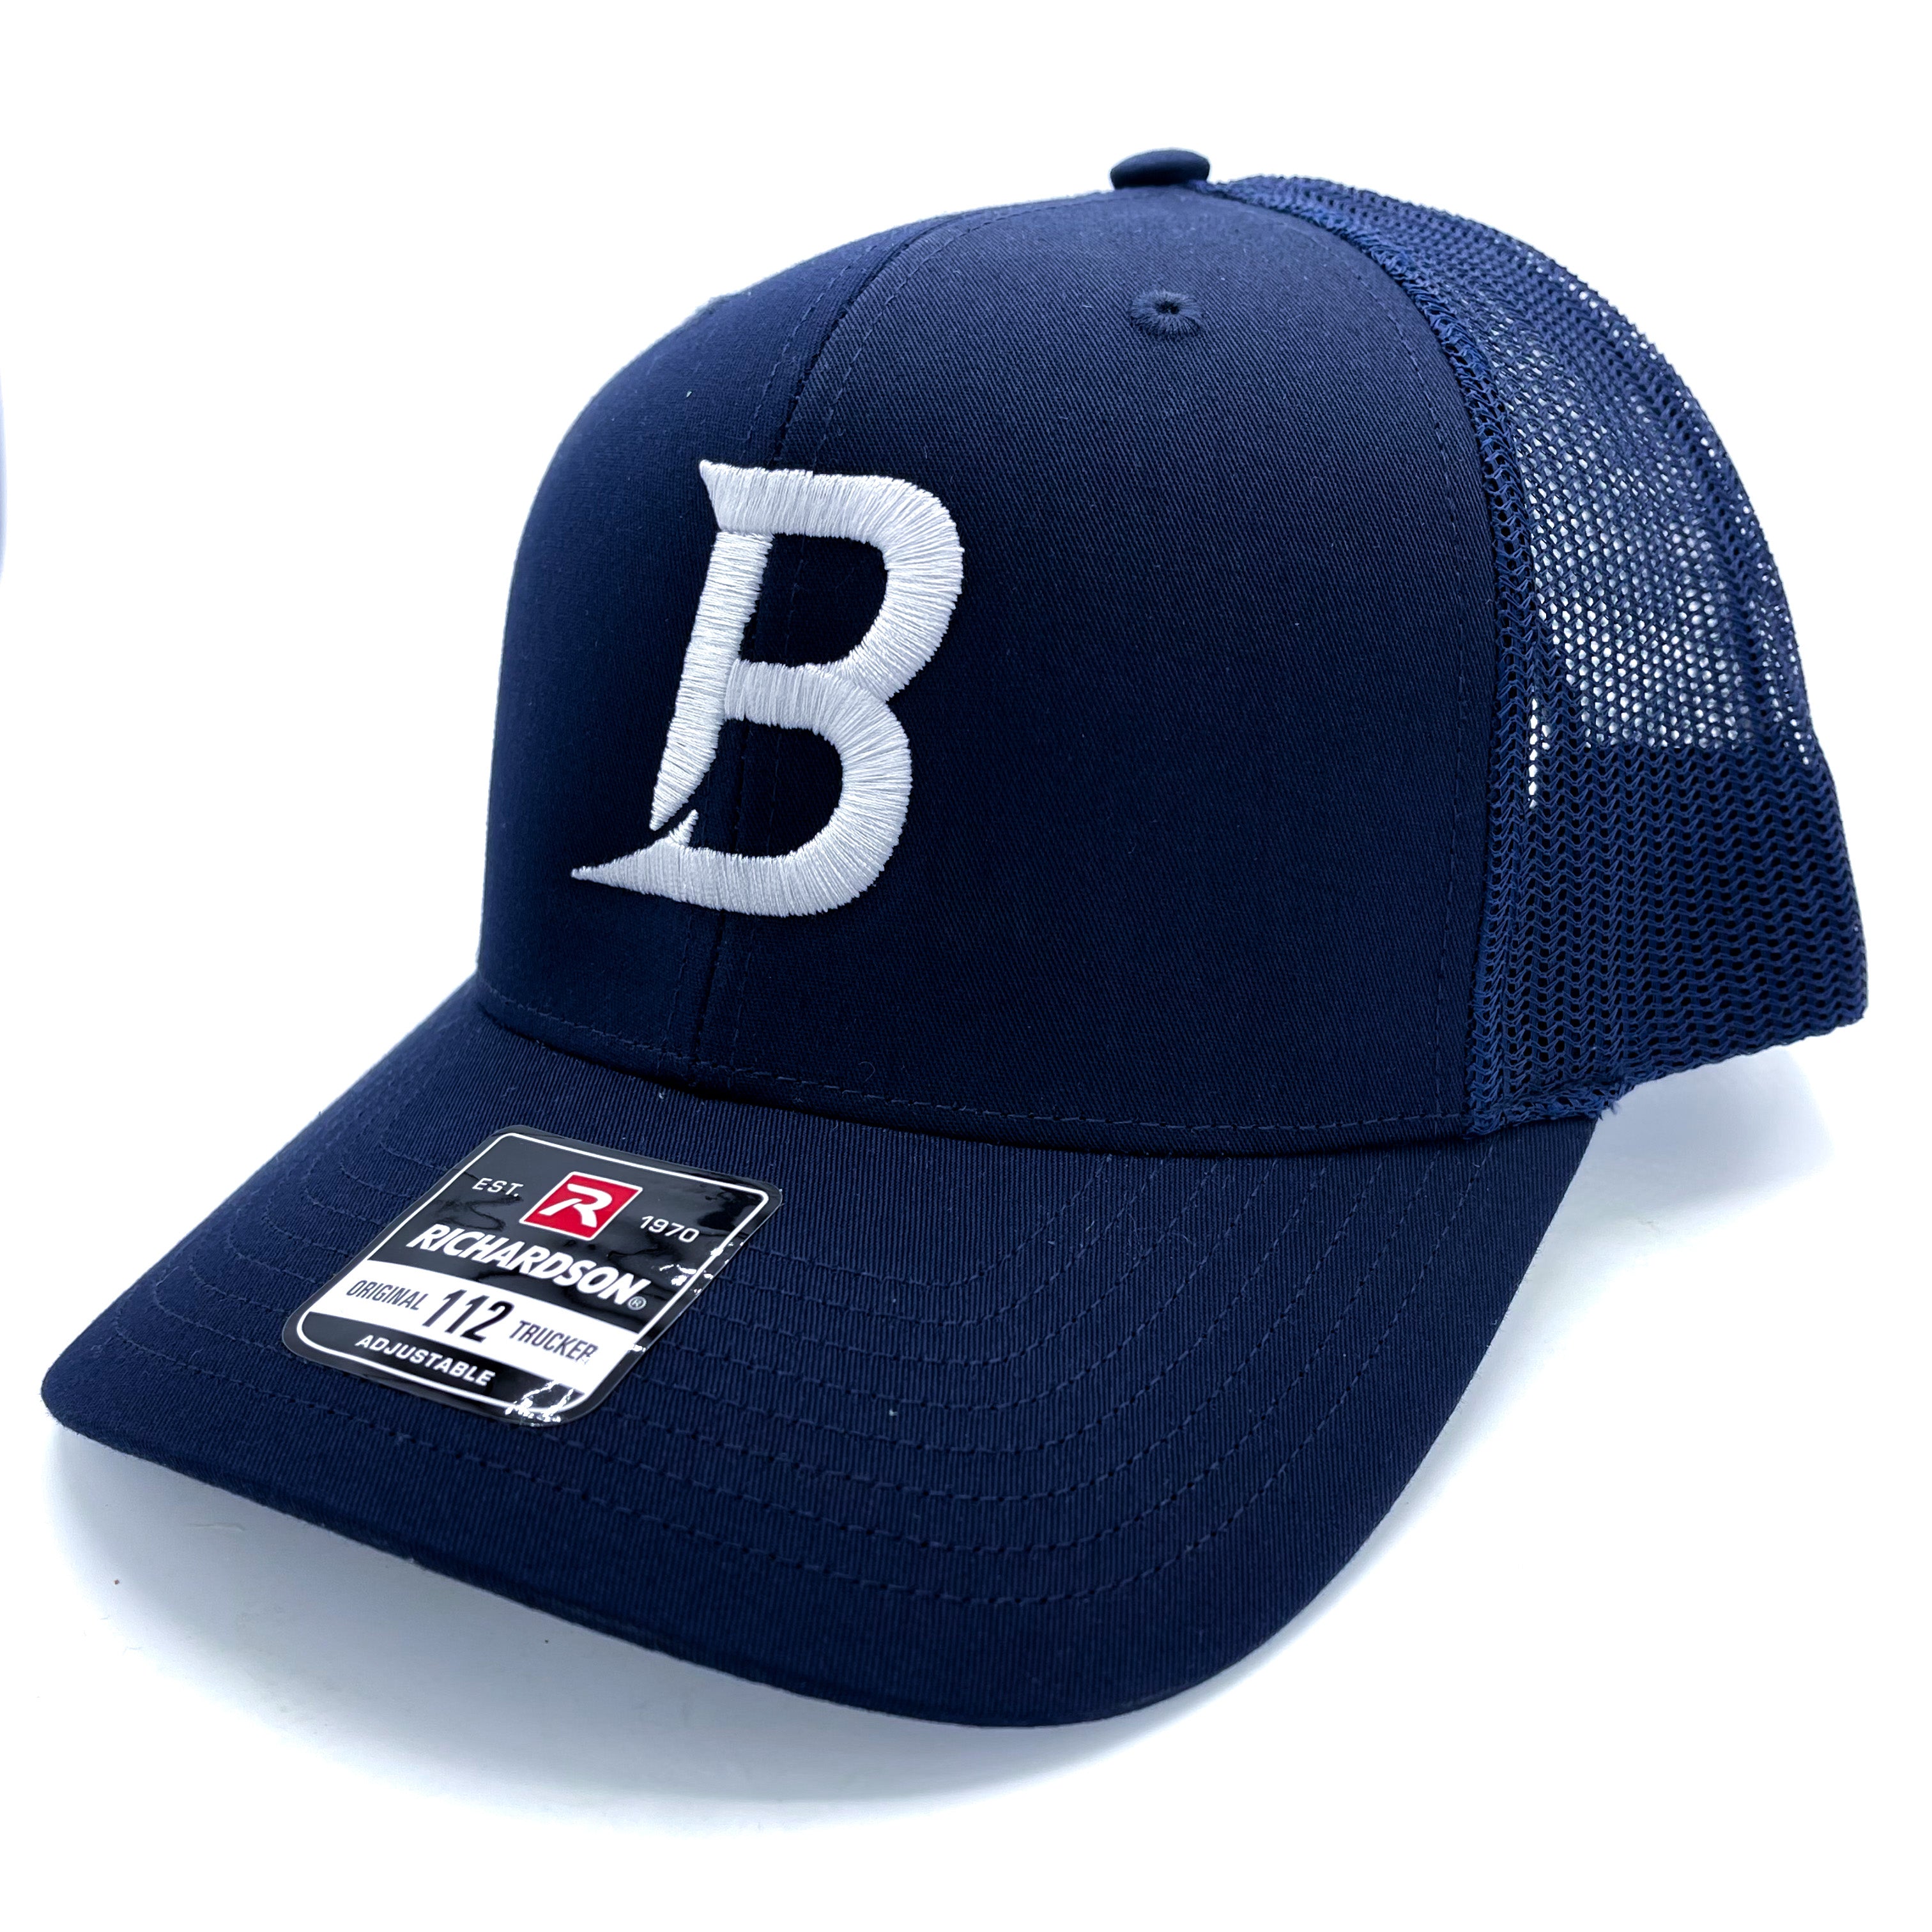 Solid Navy Bizz Snap Embroidered “B”